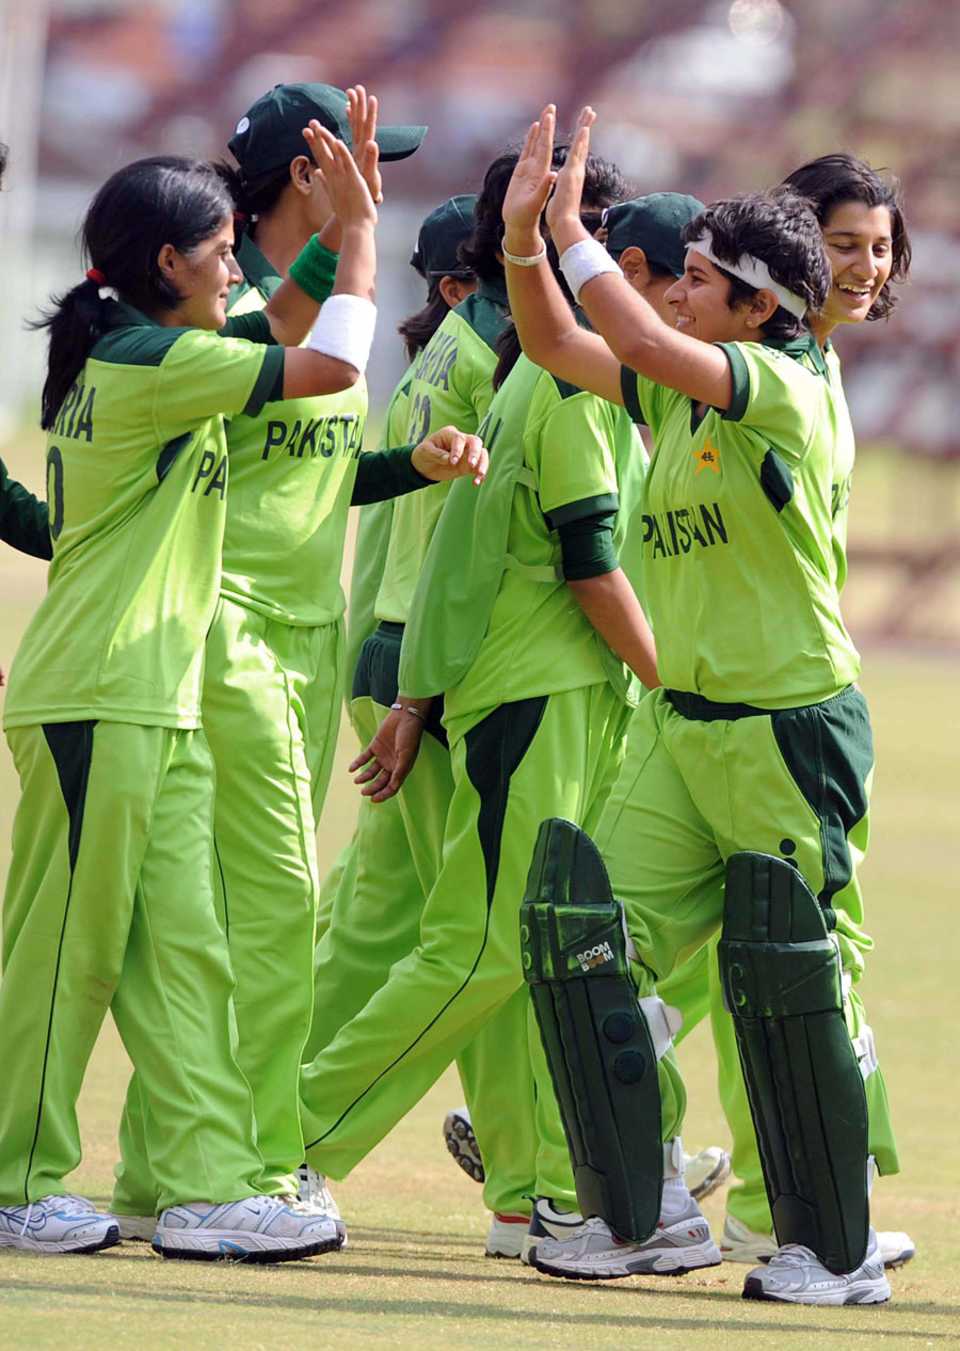 The Pakistan players celebrate on their way to an easy opening victory, Ireland Women v Pakistan Women, ICC Women's Cricket Challenge, Potchefstroom, October 6, 2010